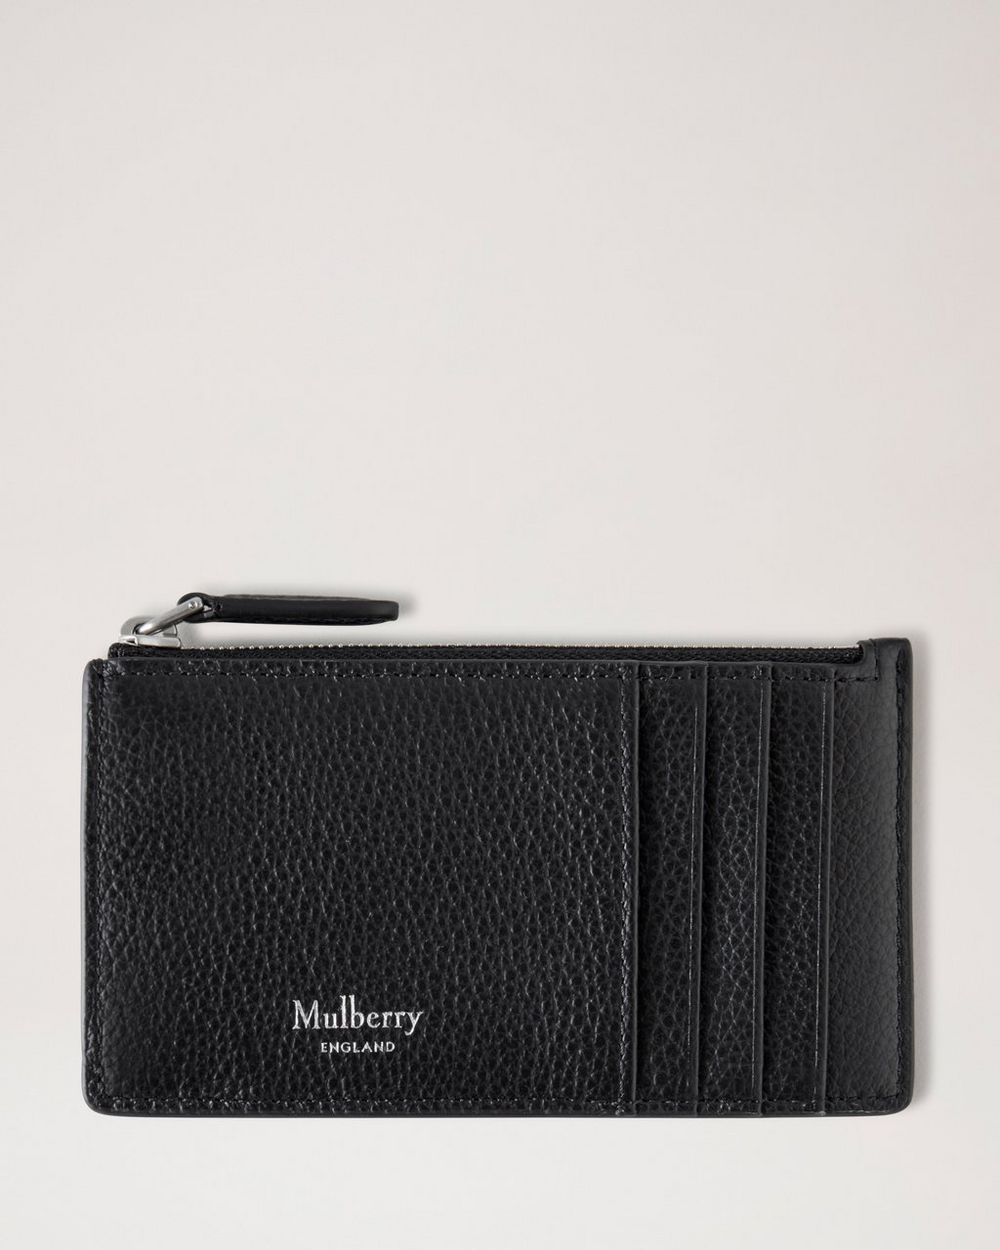 Women's Bayswater Bag by Mulberry